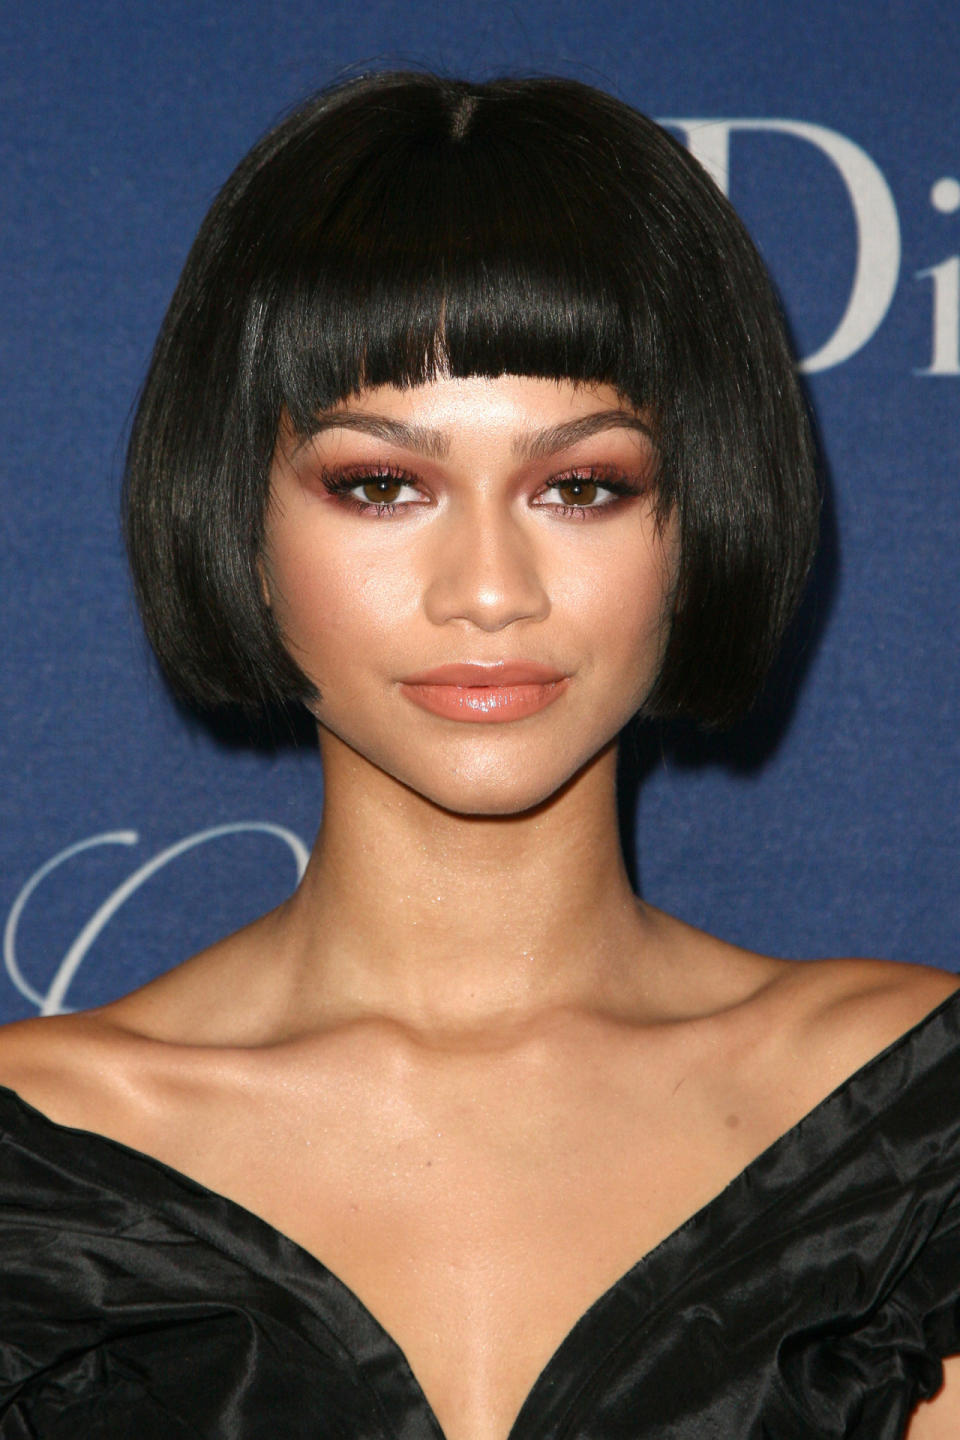 At the Princess Grace Awards Gala presented by Christian Dior Couture in Beverly Hills, Zendaya sported a razor sharp bob.